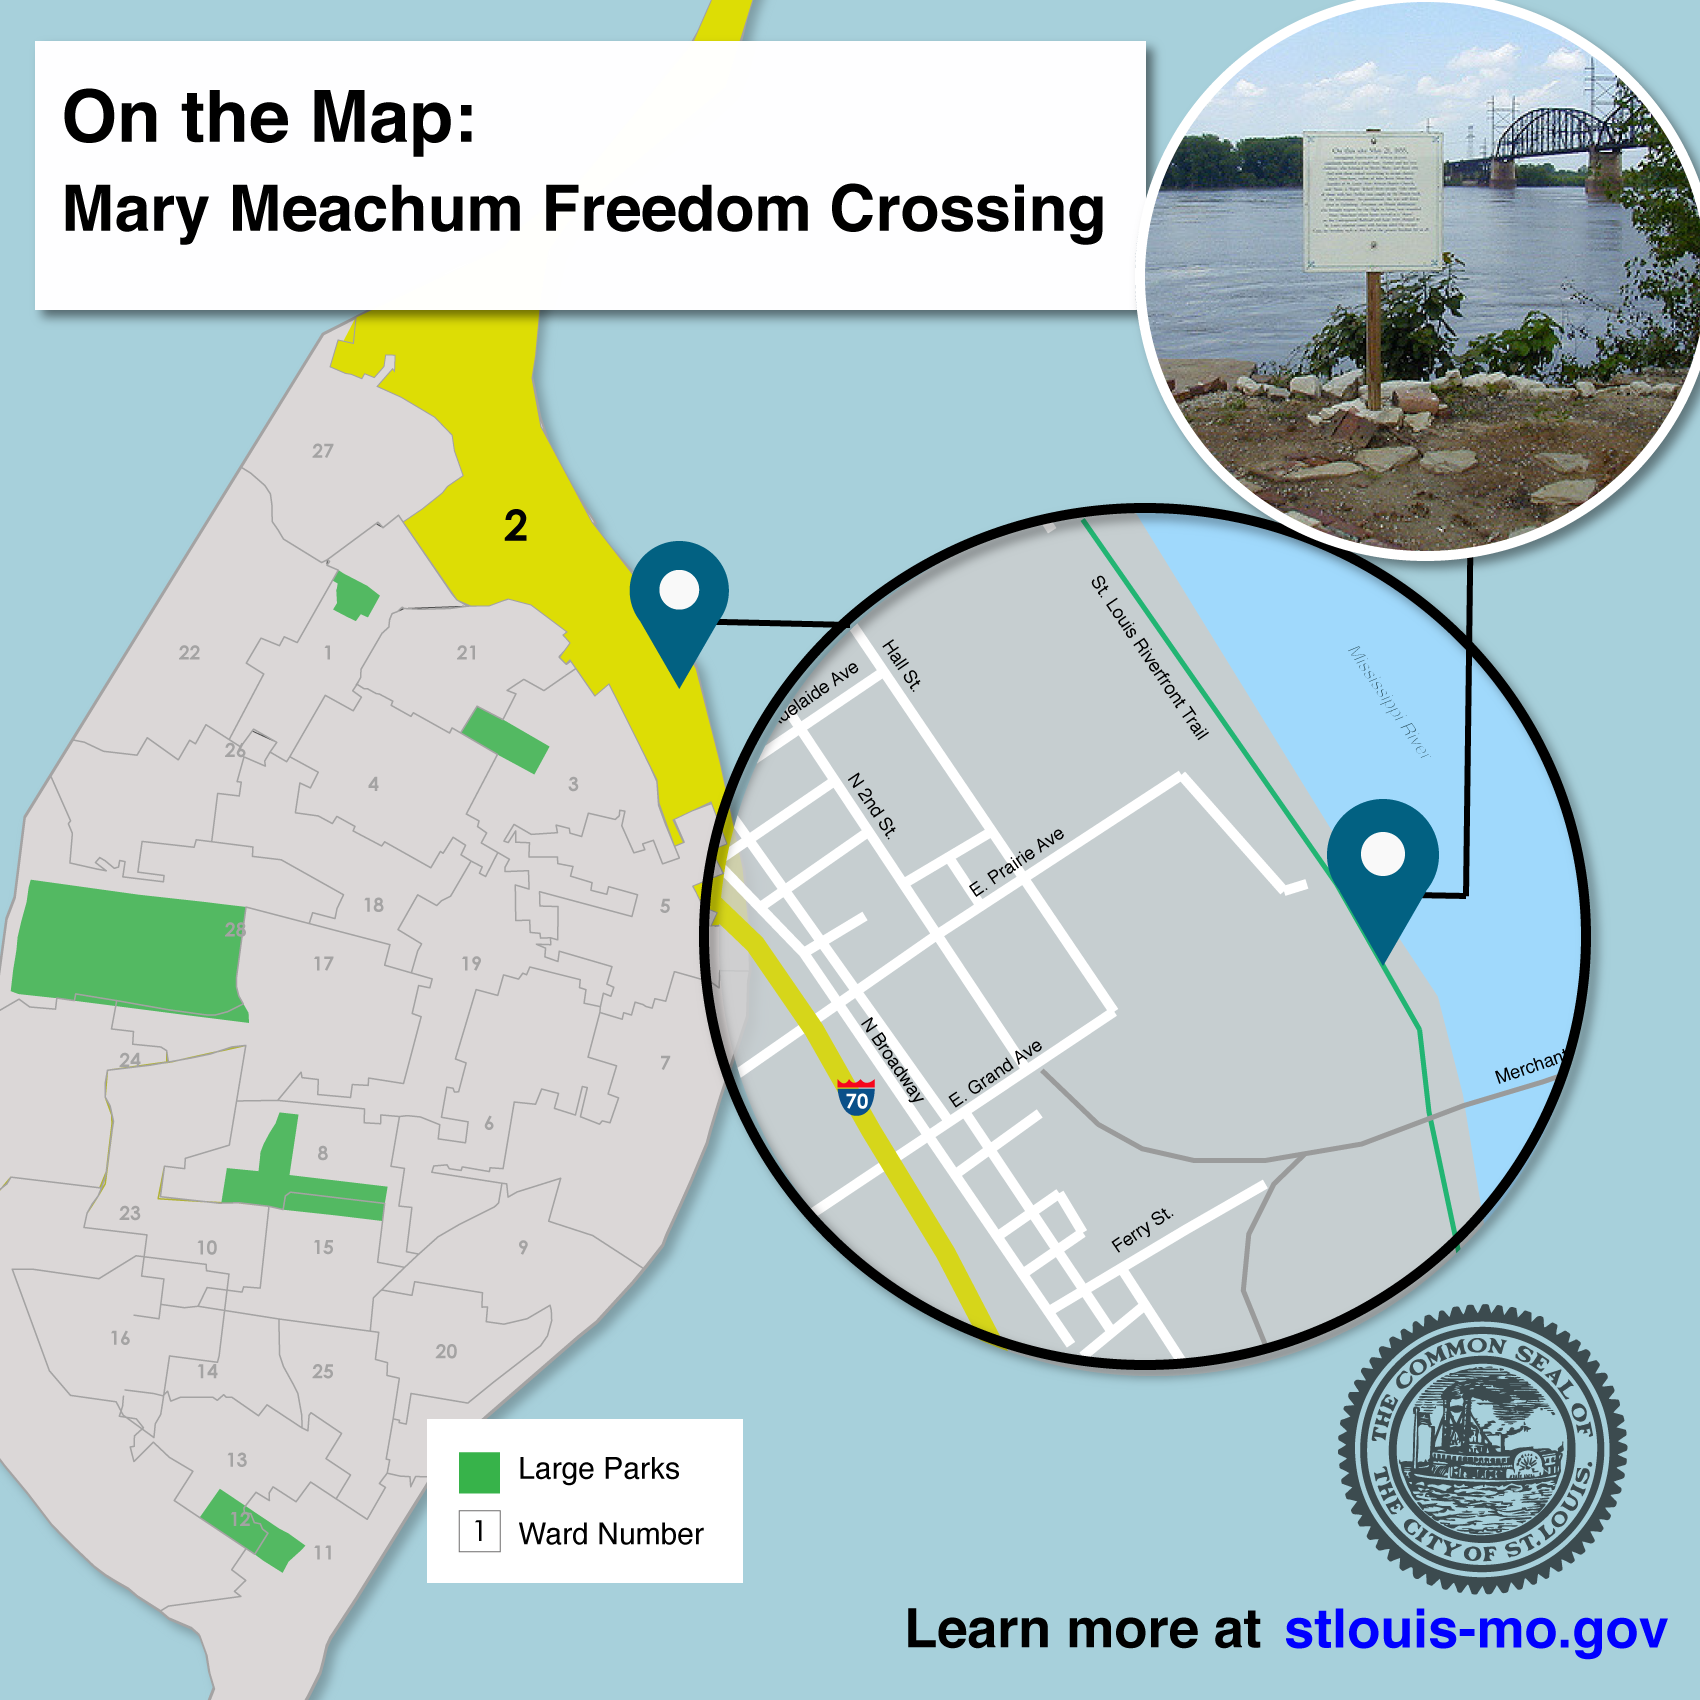  On the Map Mary Meachum Freedom Crossing